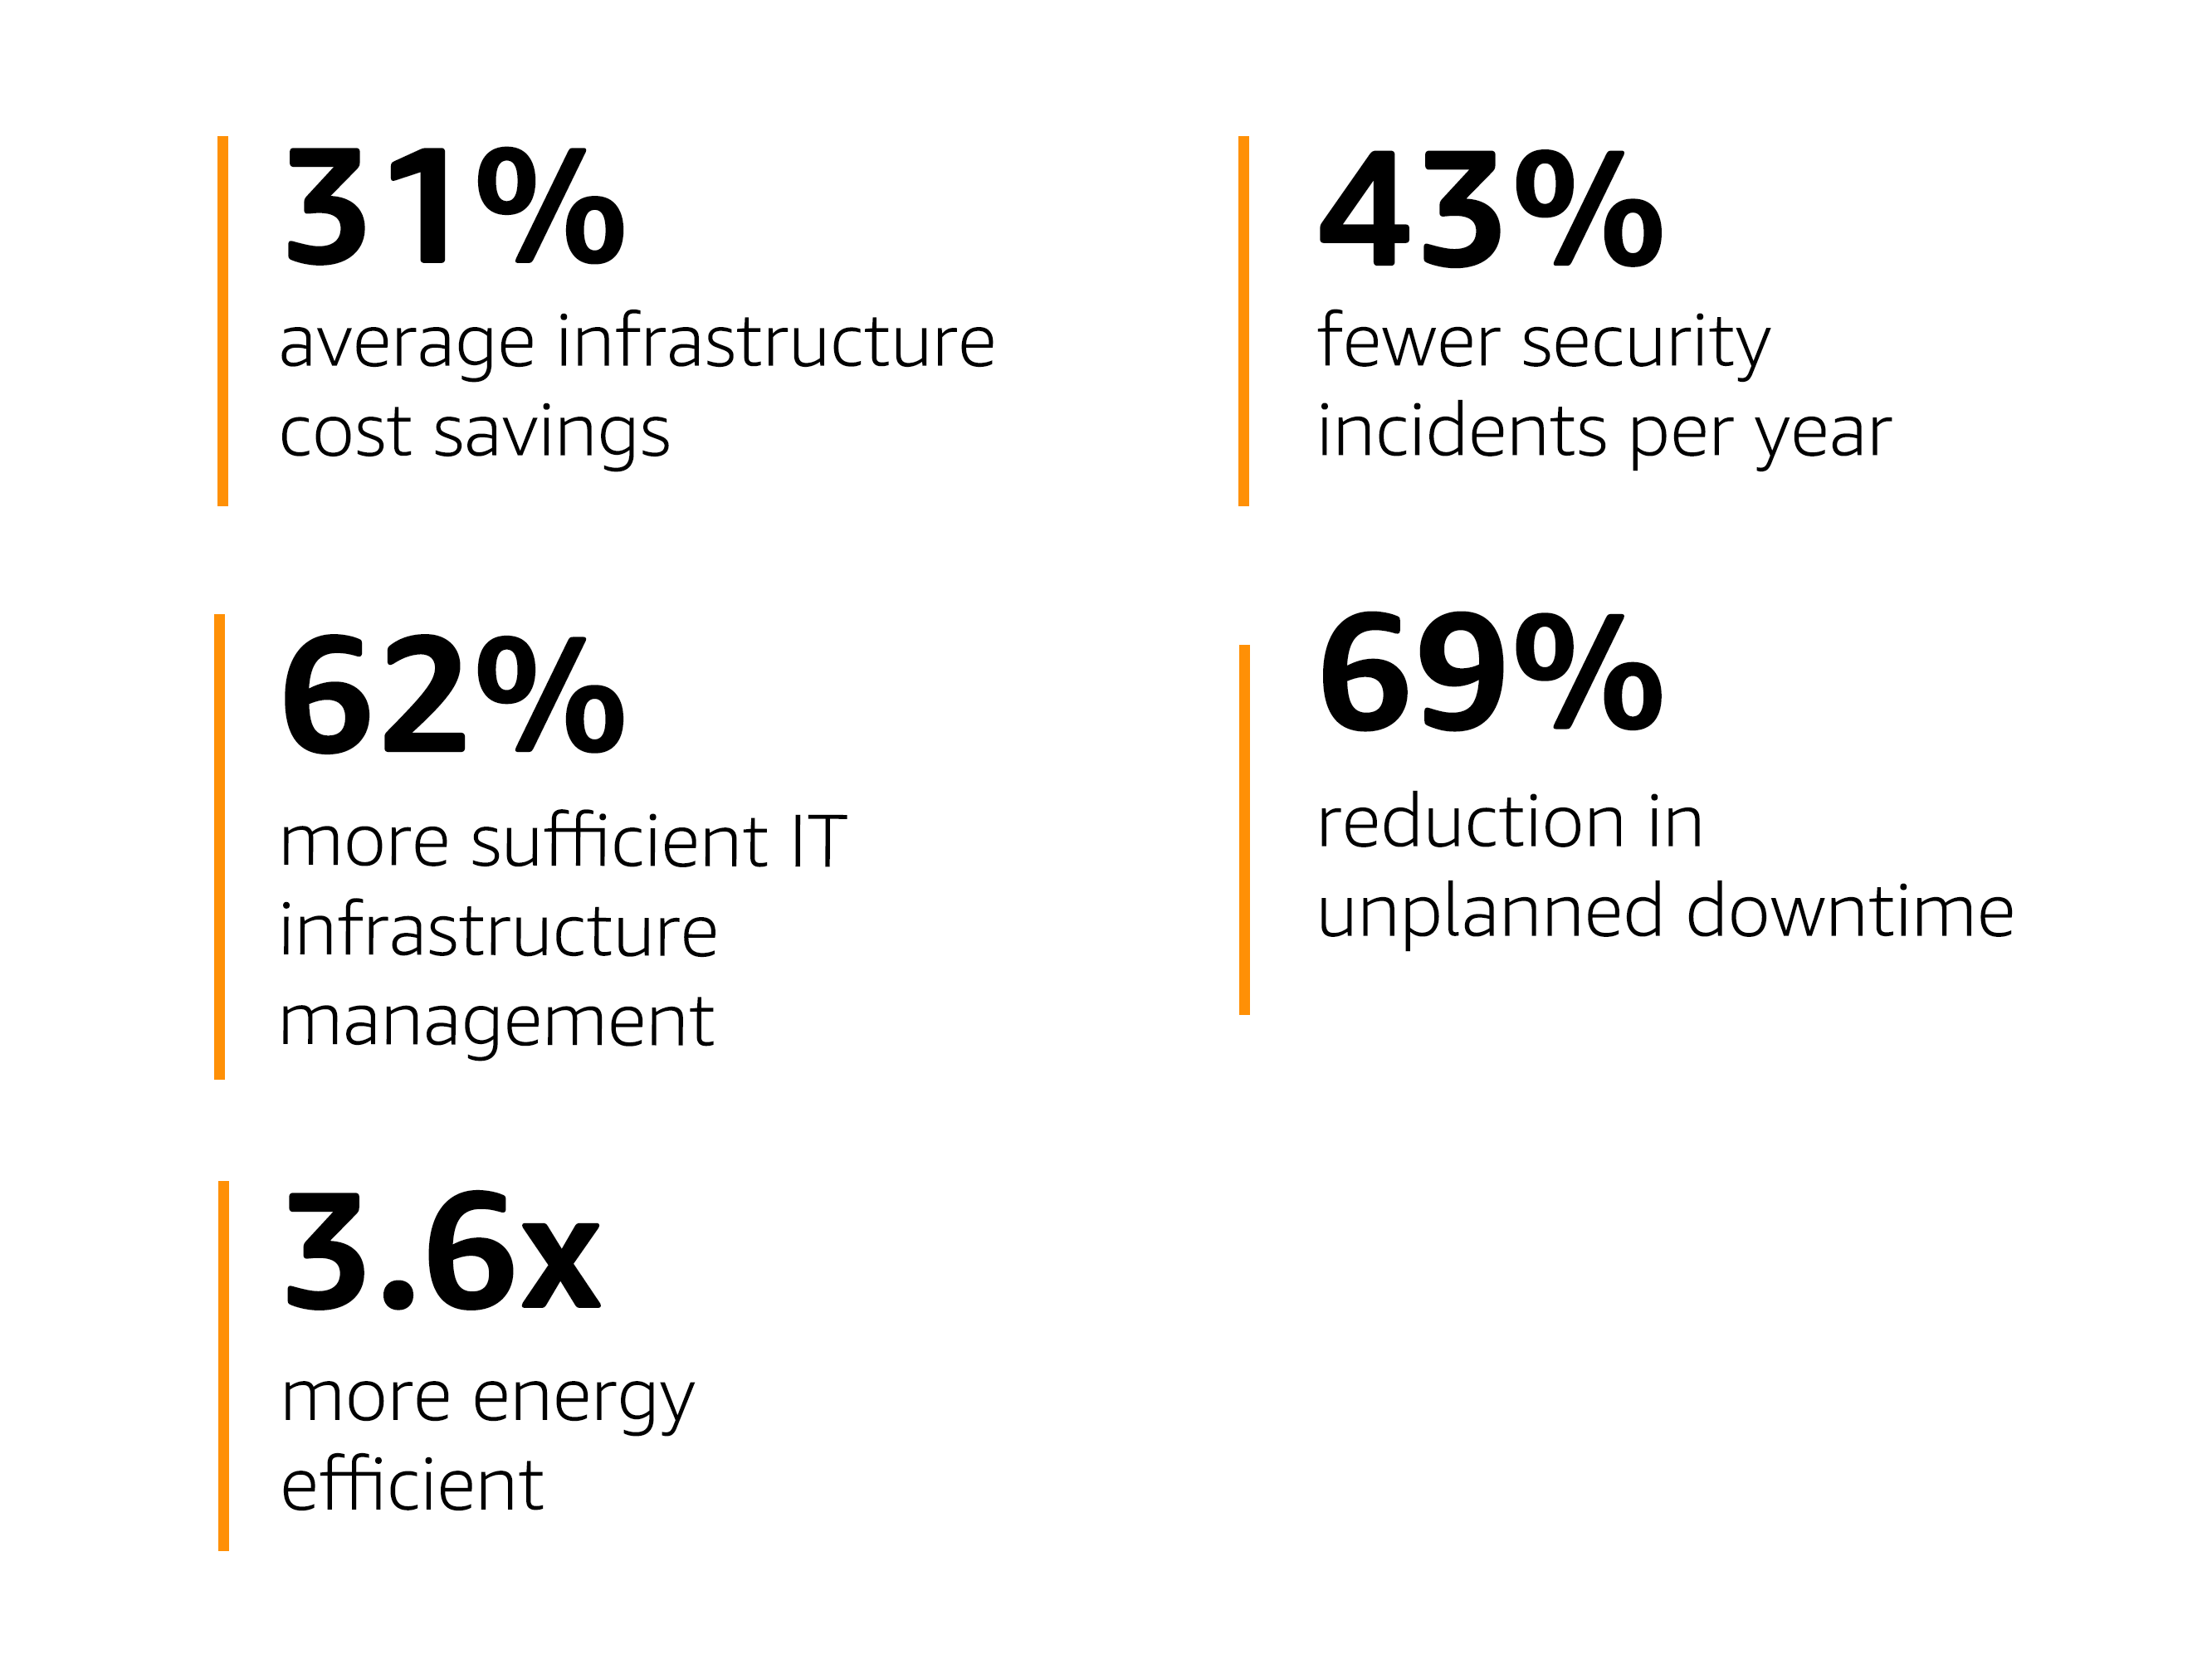 31% average infrastructure cost savings; 62% more sufficient IT infrastructure management; 3.6x more energy efficient; 43% fewer security incidents per year; 69% reduction in unplanned downtime